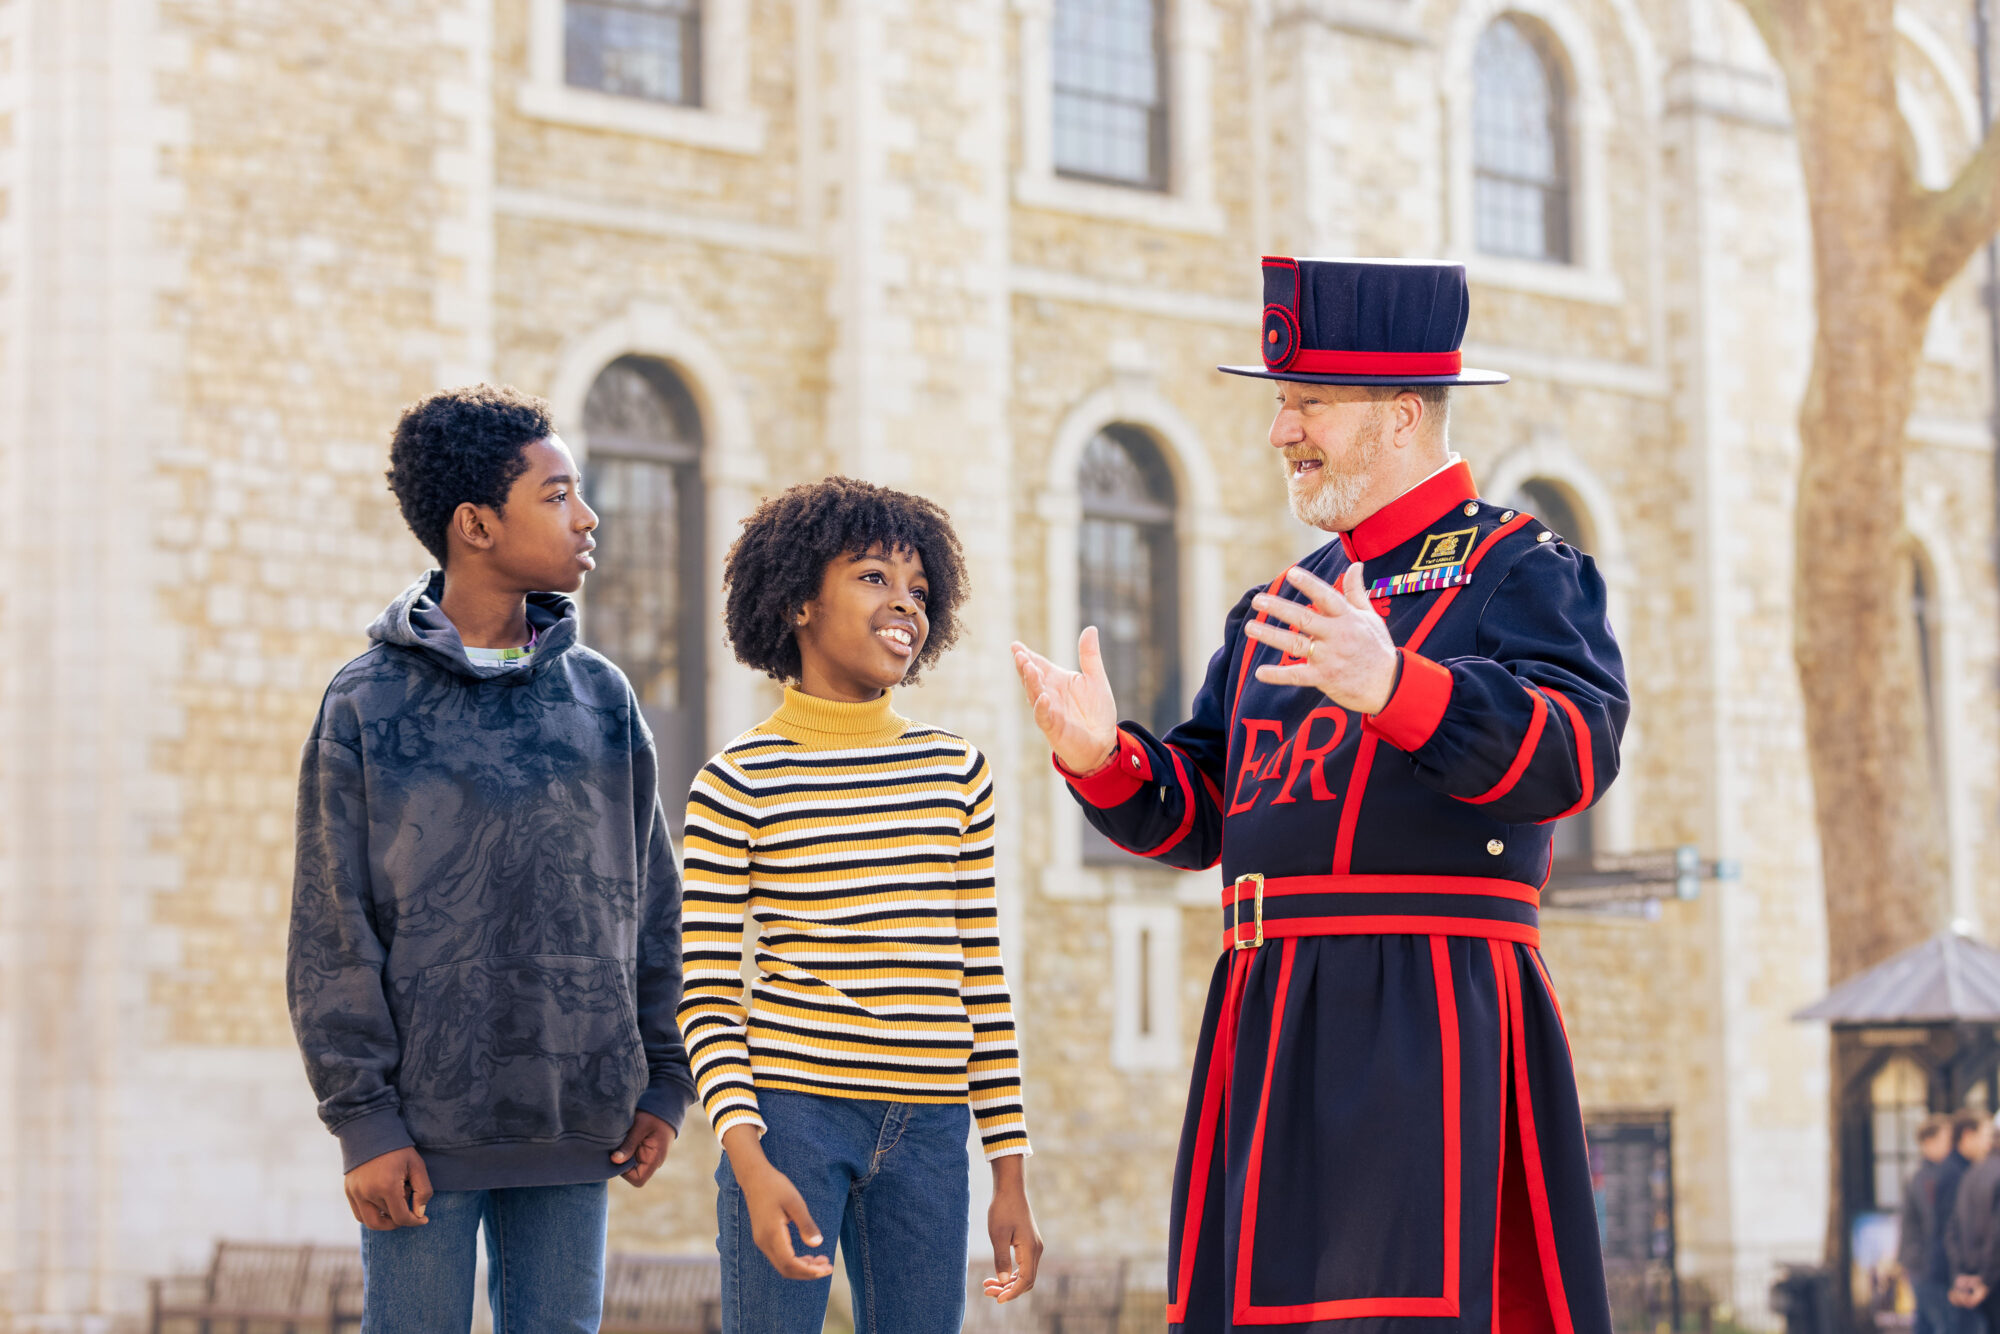 Tower of London - a man wearing Tower of London costume speaks to a group of children